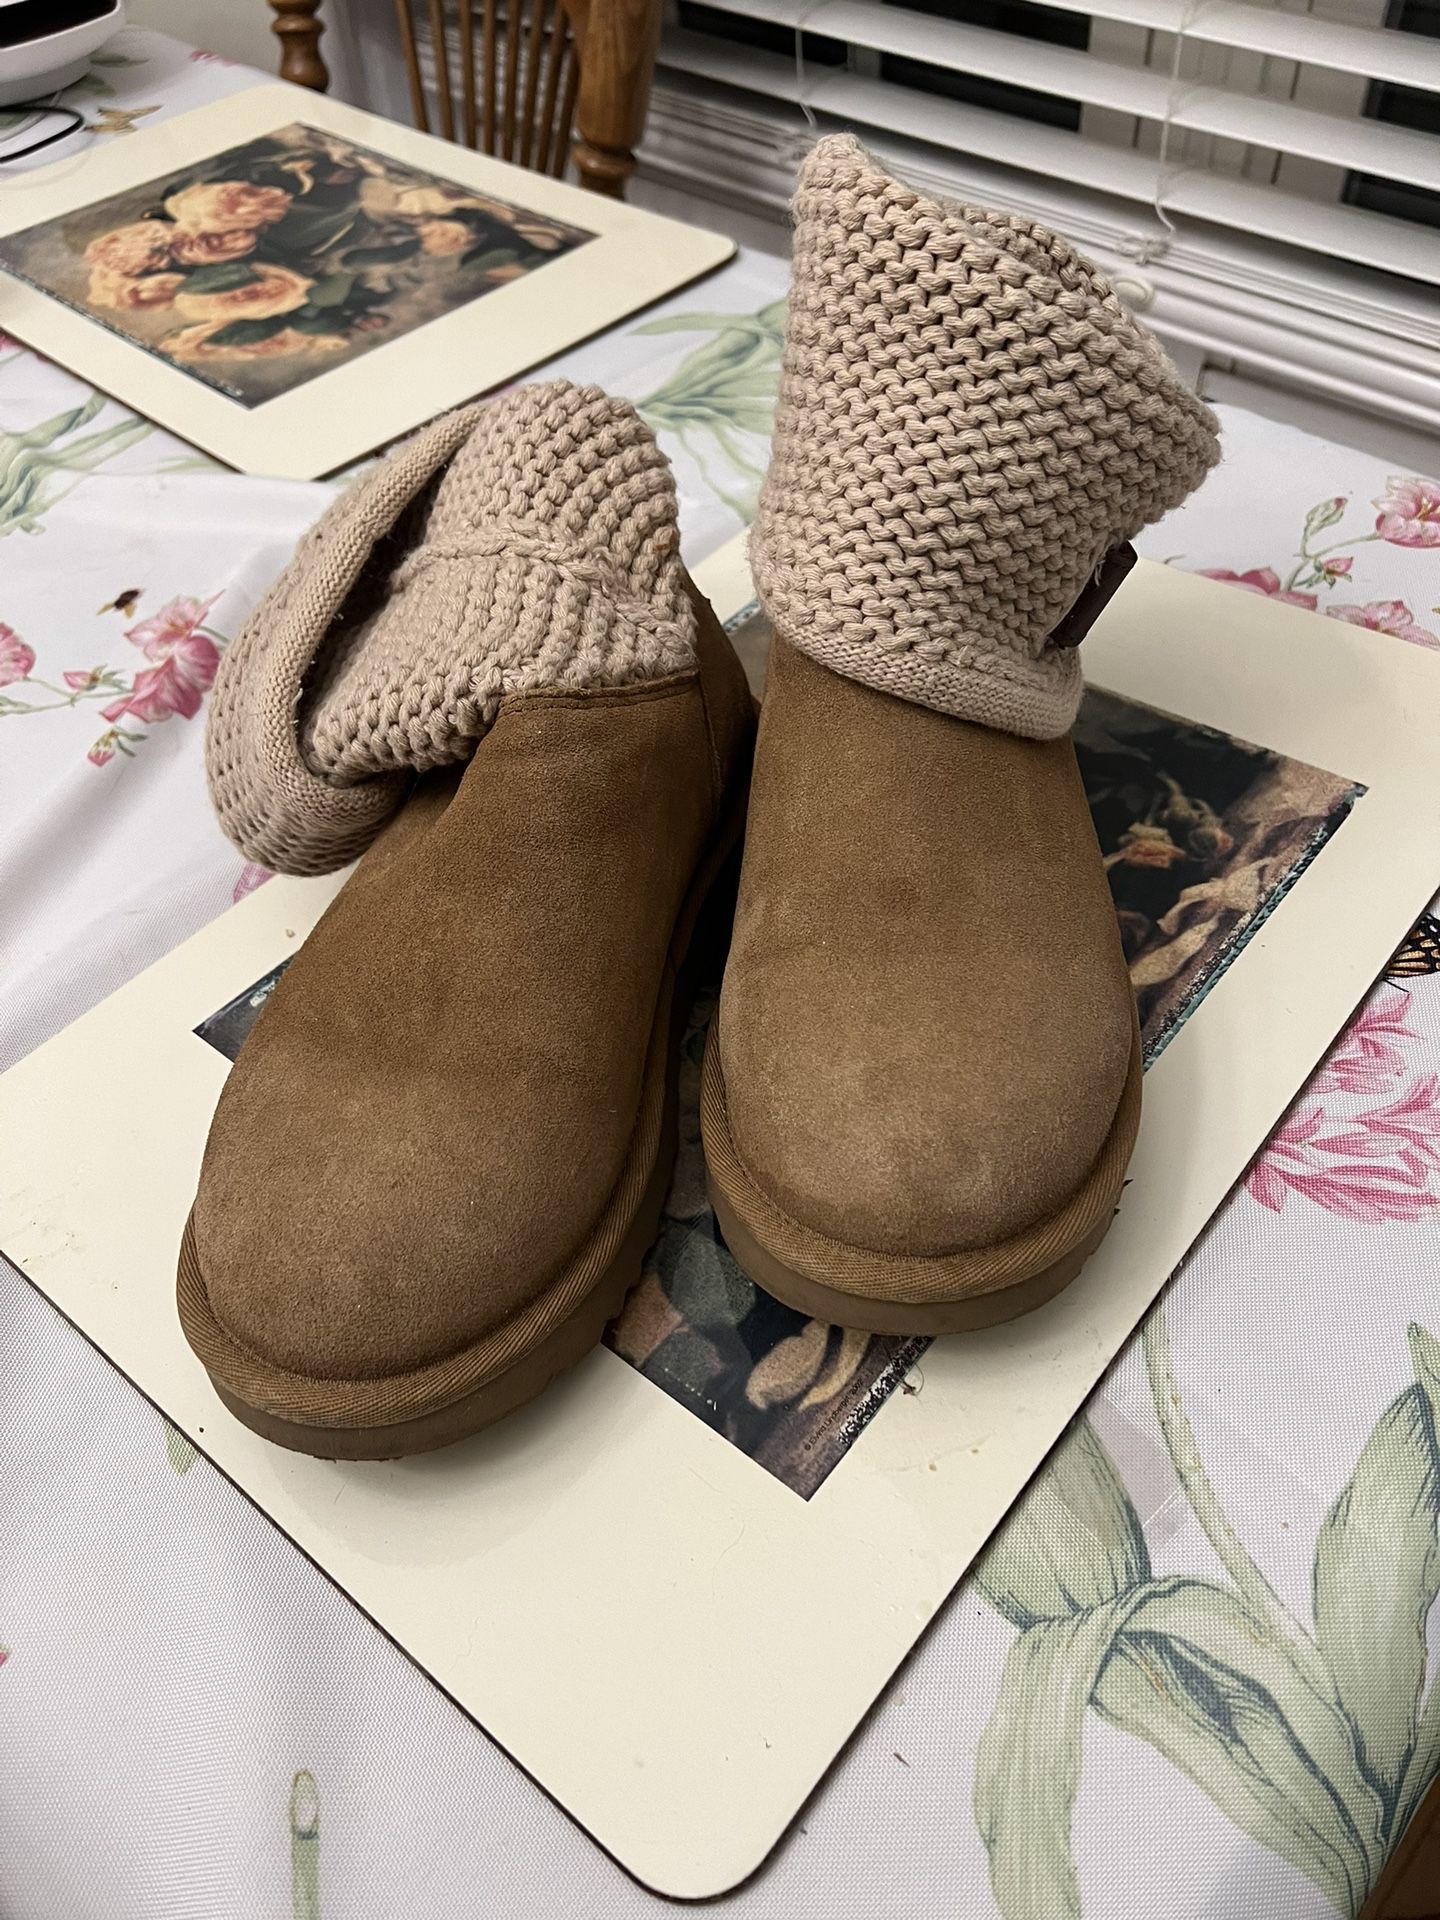 Used Ugg Boots